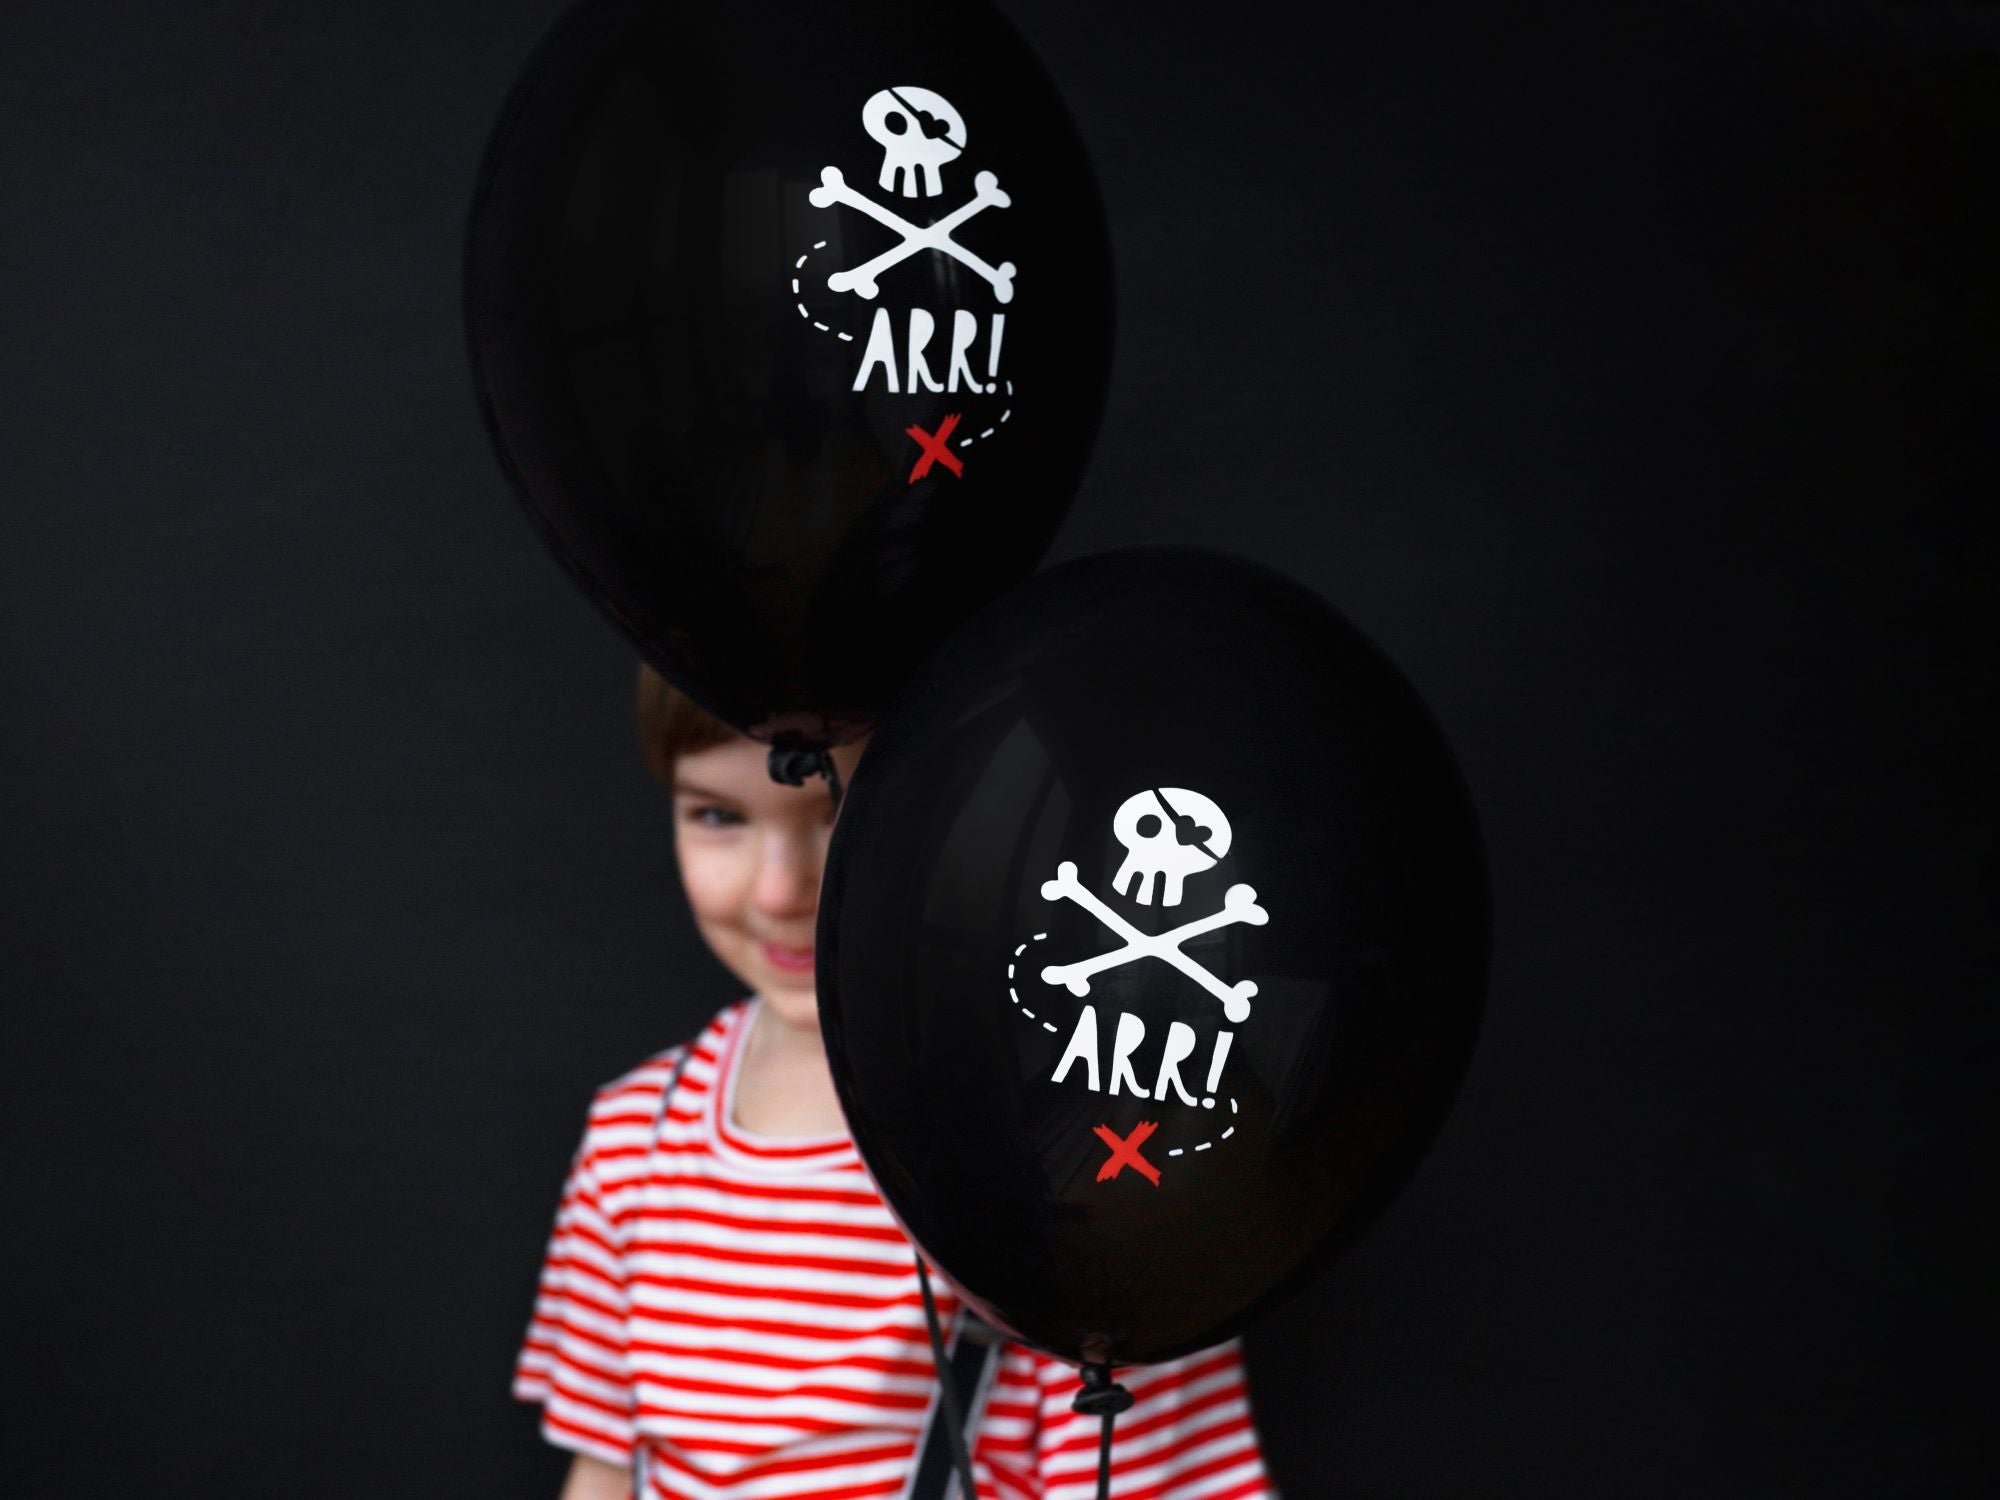 Pirate Party Balloons 30cm Pack of 6